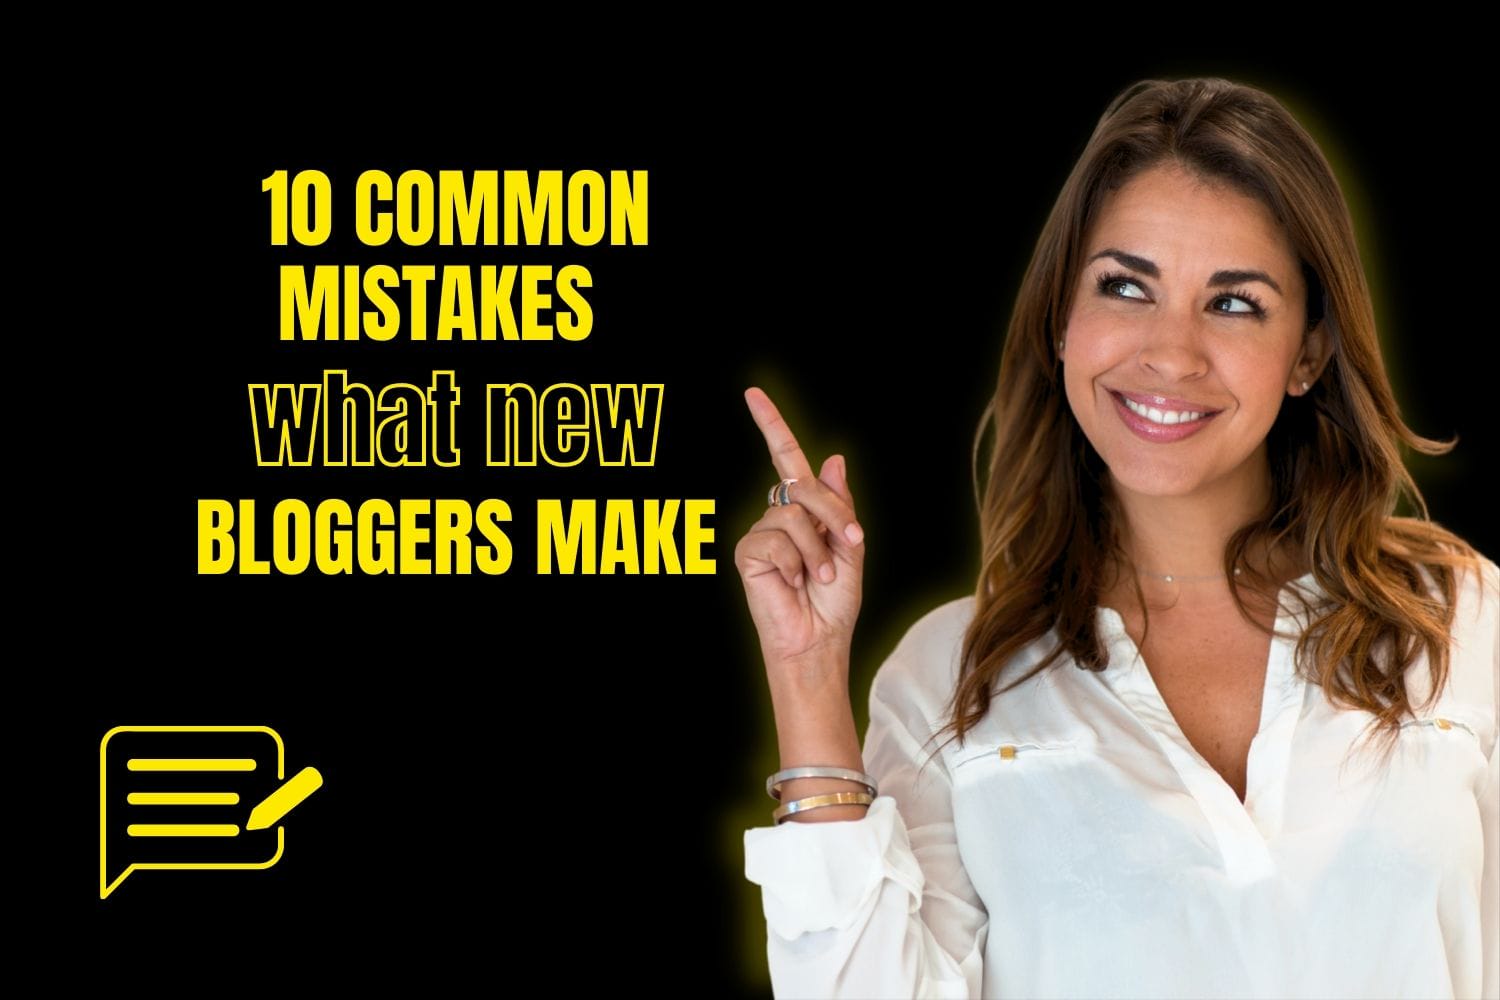 10 common mistakes what new bloggers make